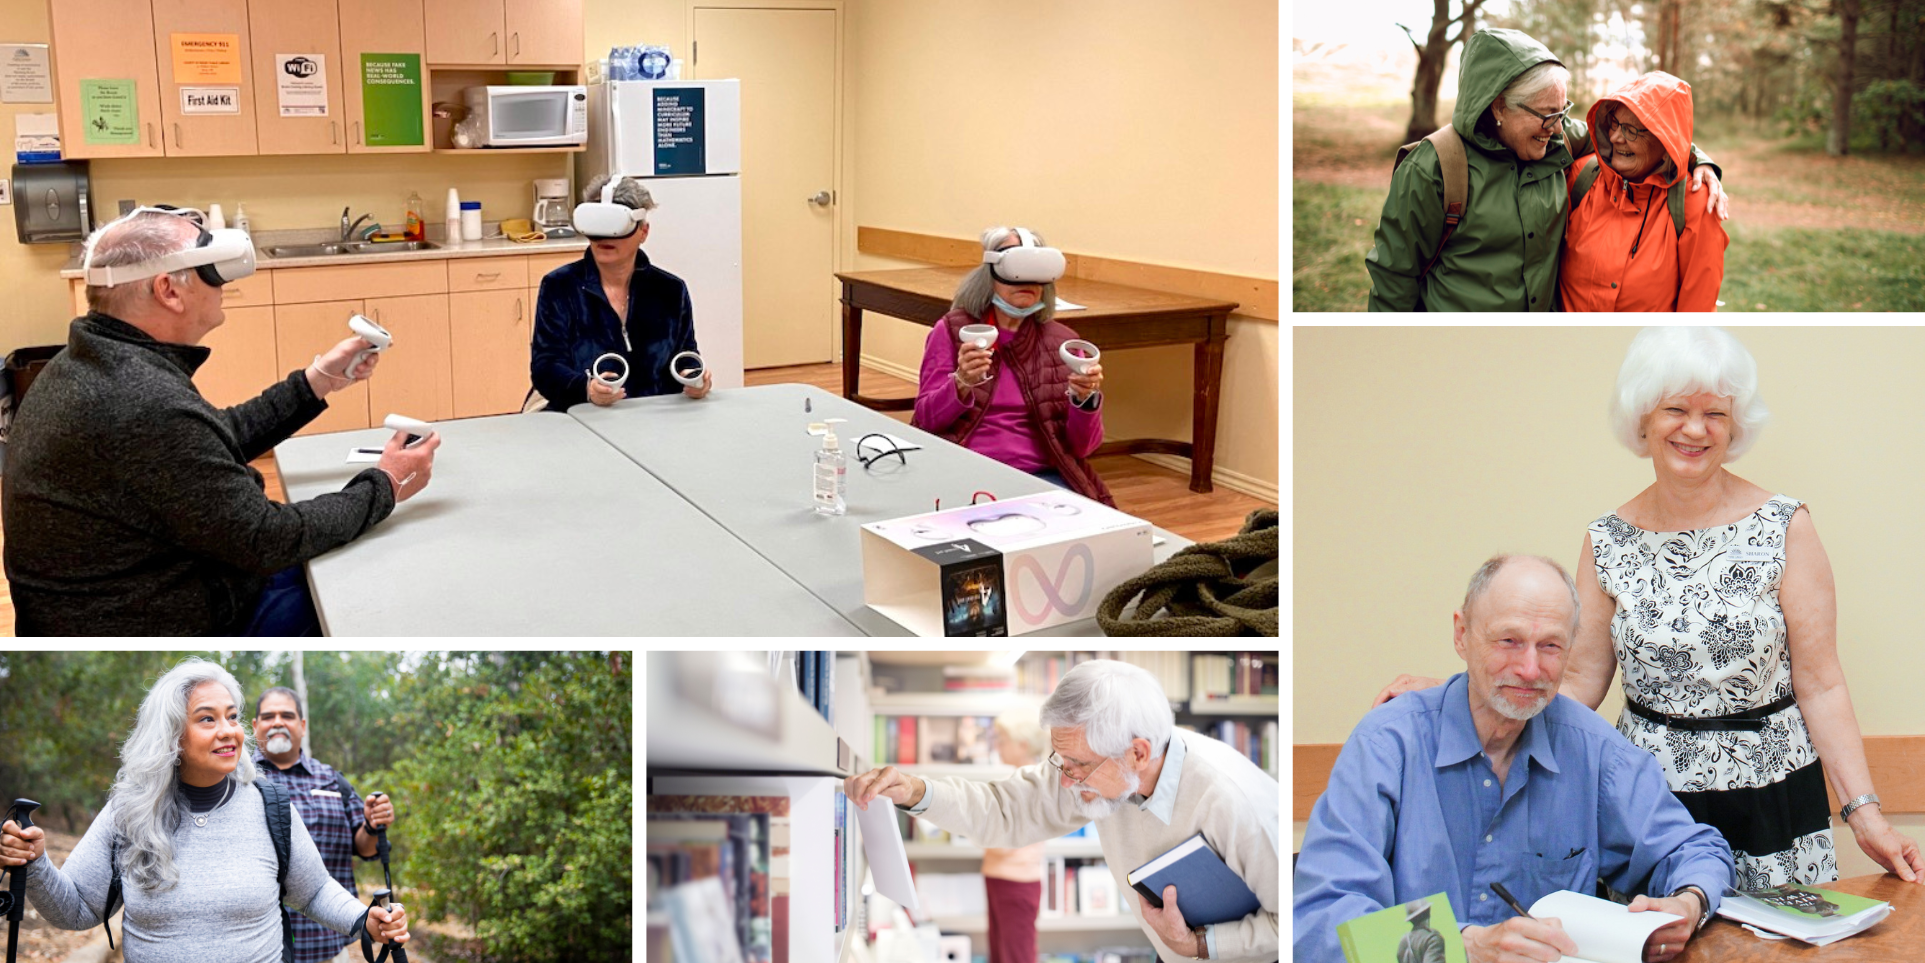 A collage of images featuring seniors enjoying hiking, games, virtual reality, and other programming.